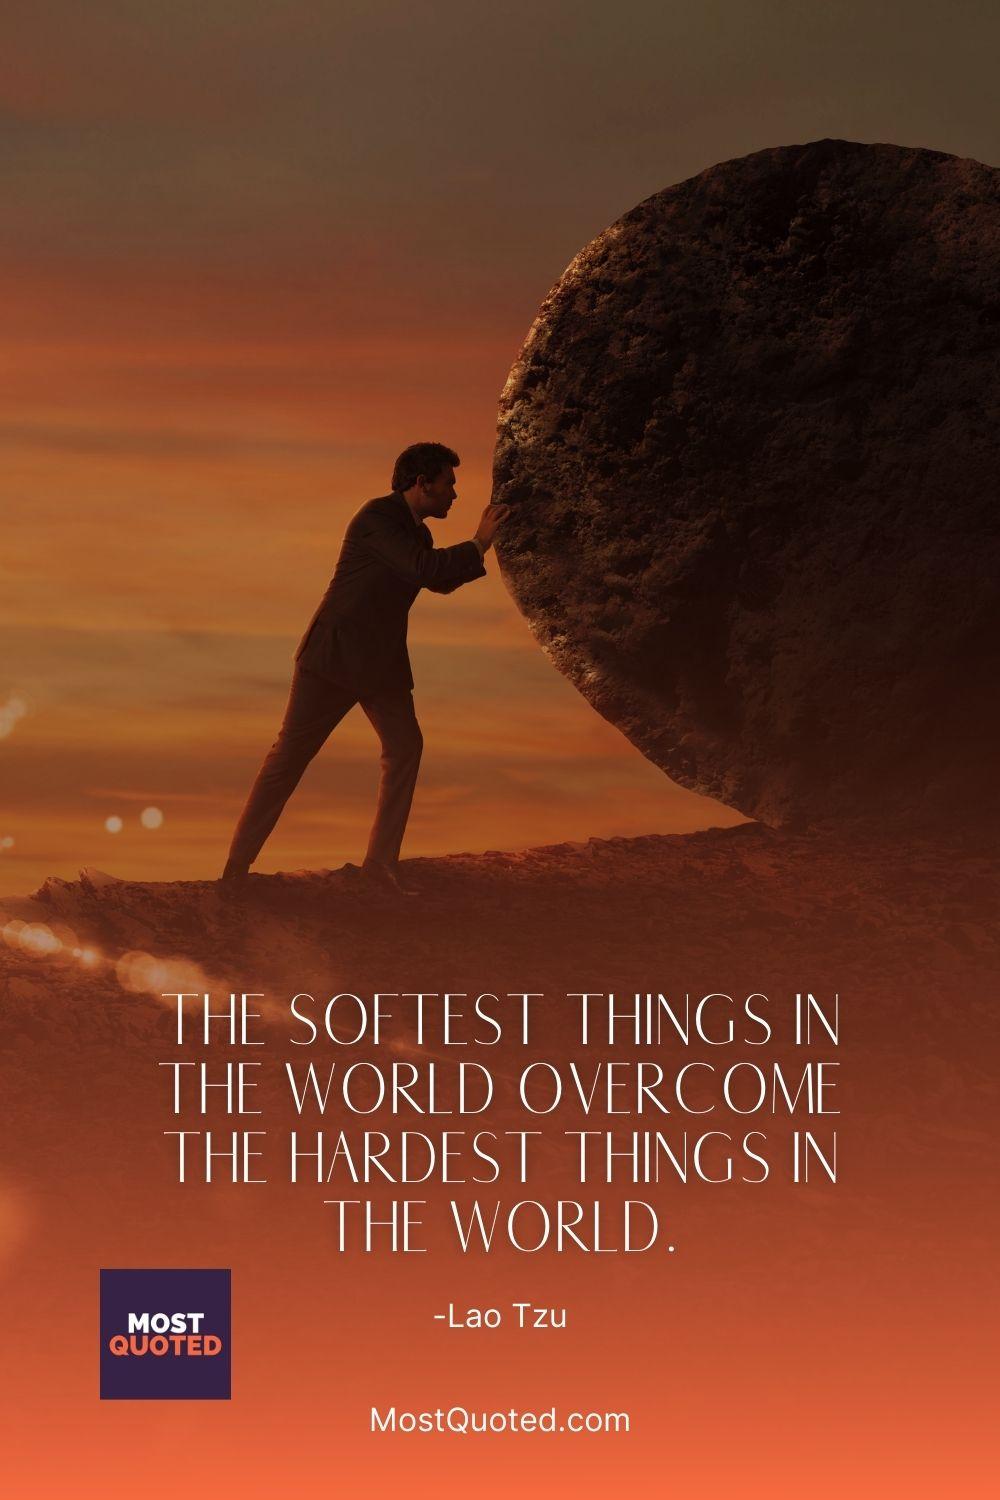 The softest things in the world overcome the hardest things in the world. - Lao Tzu